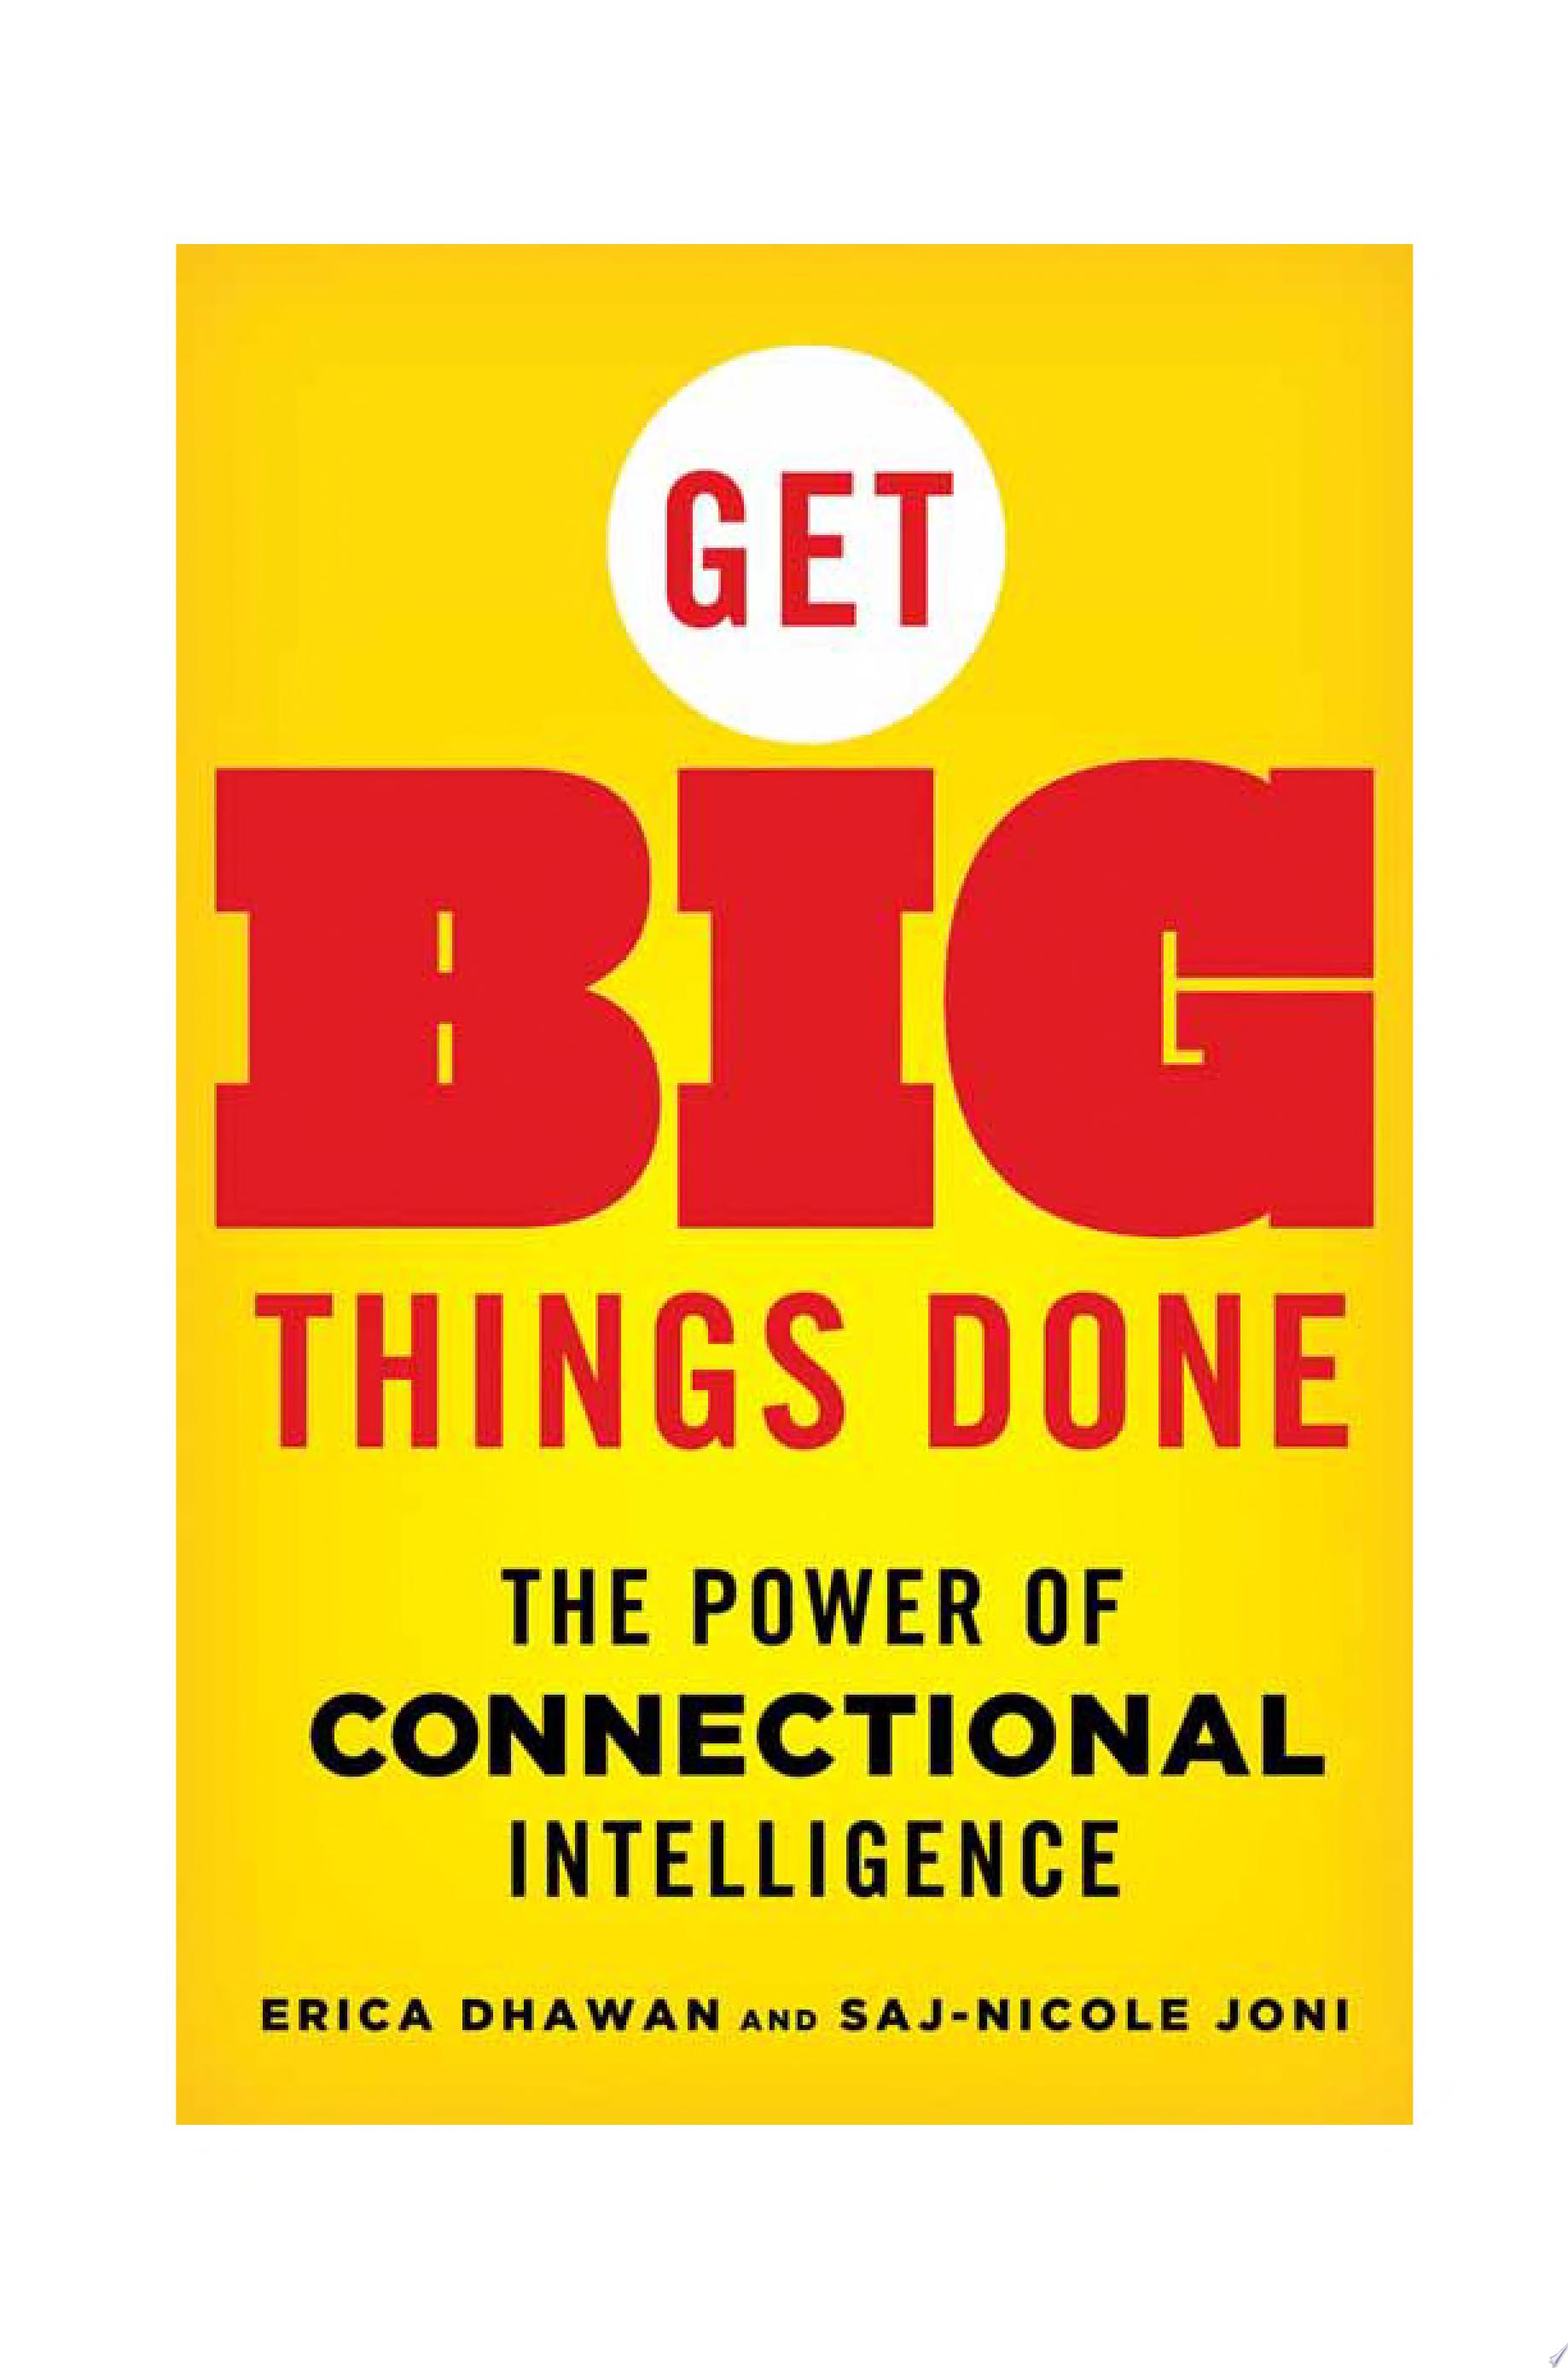 Image for "Get Big Things Done"